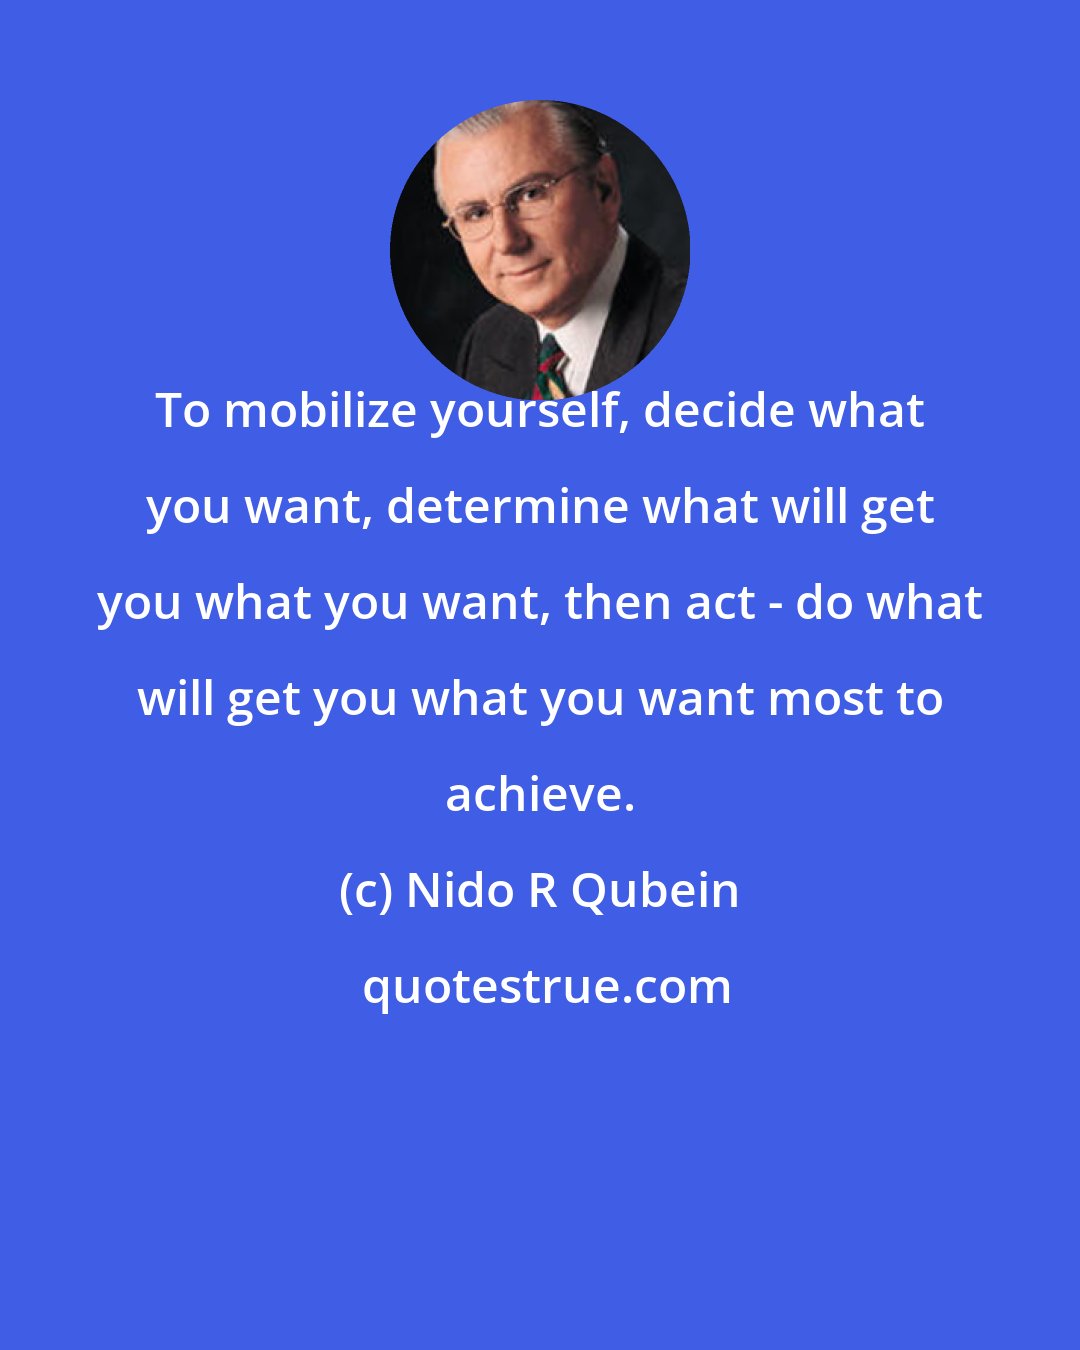 Nido R Qubein: To mobilize yourself, decide what you want, determine what will get you what you want, then act - do what will get you what you want most to achieve.